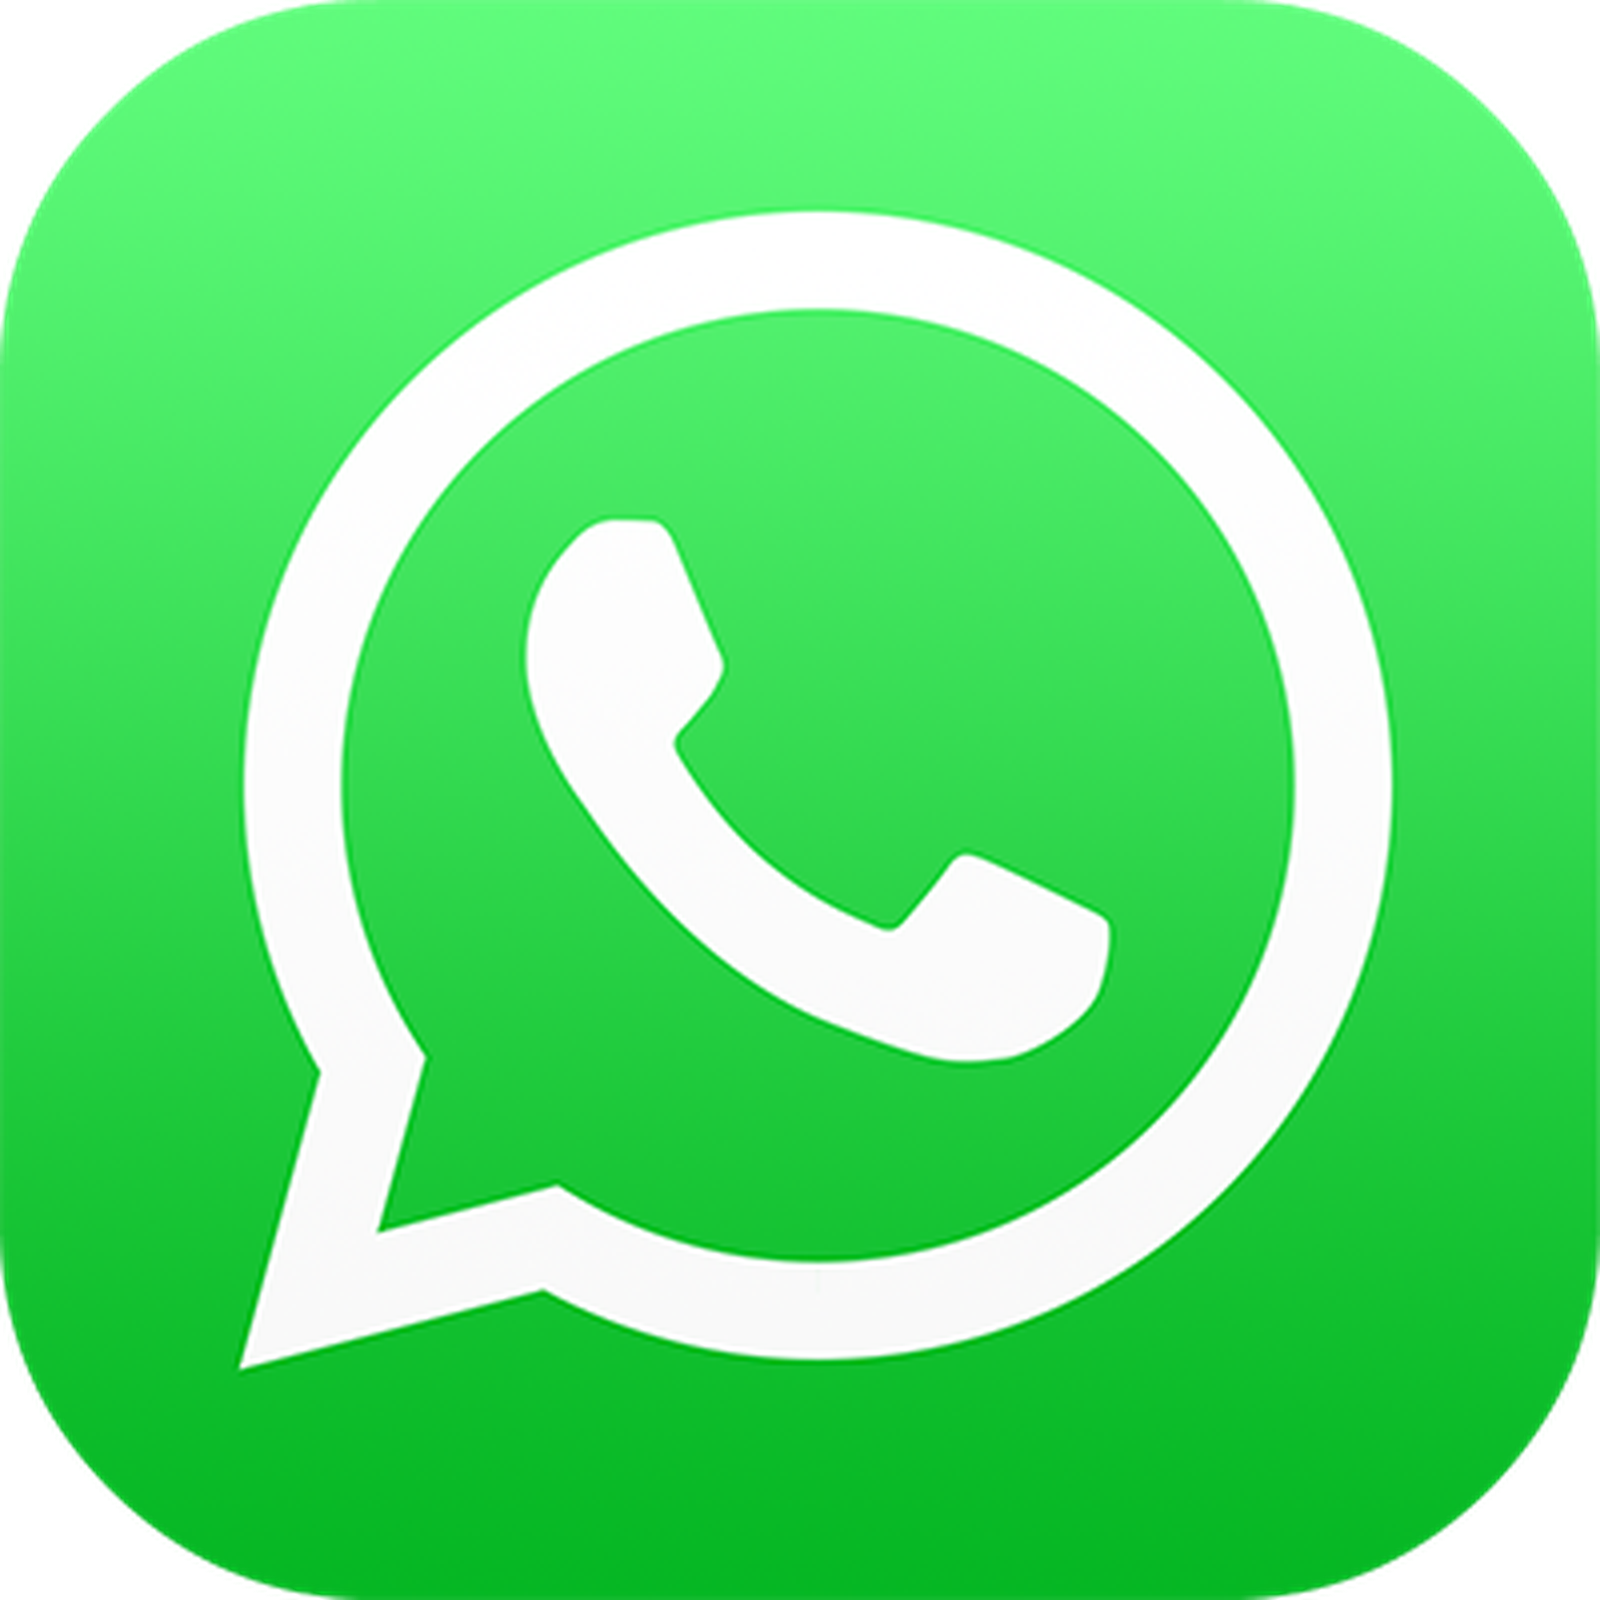 WhatsApp uses status updates to remind users about their privacy commitments